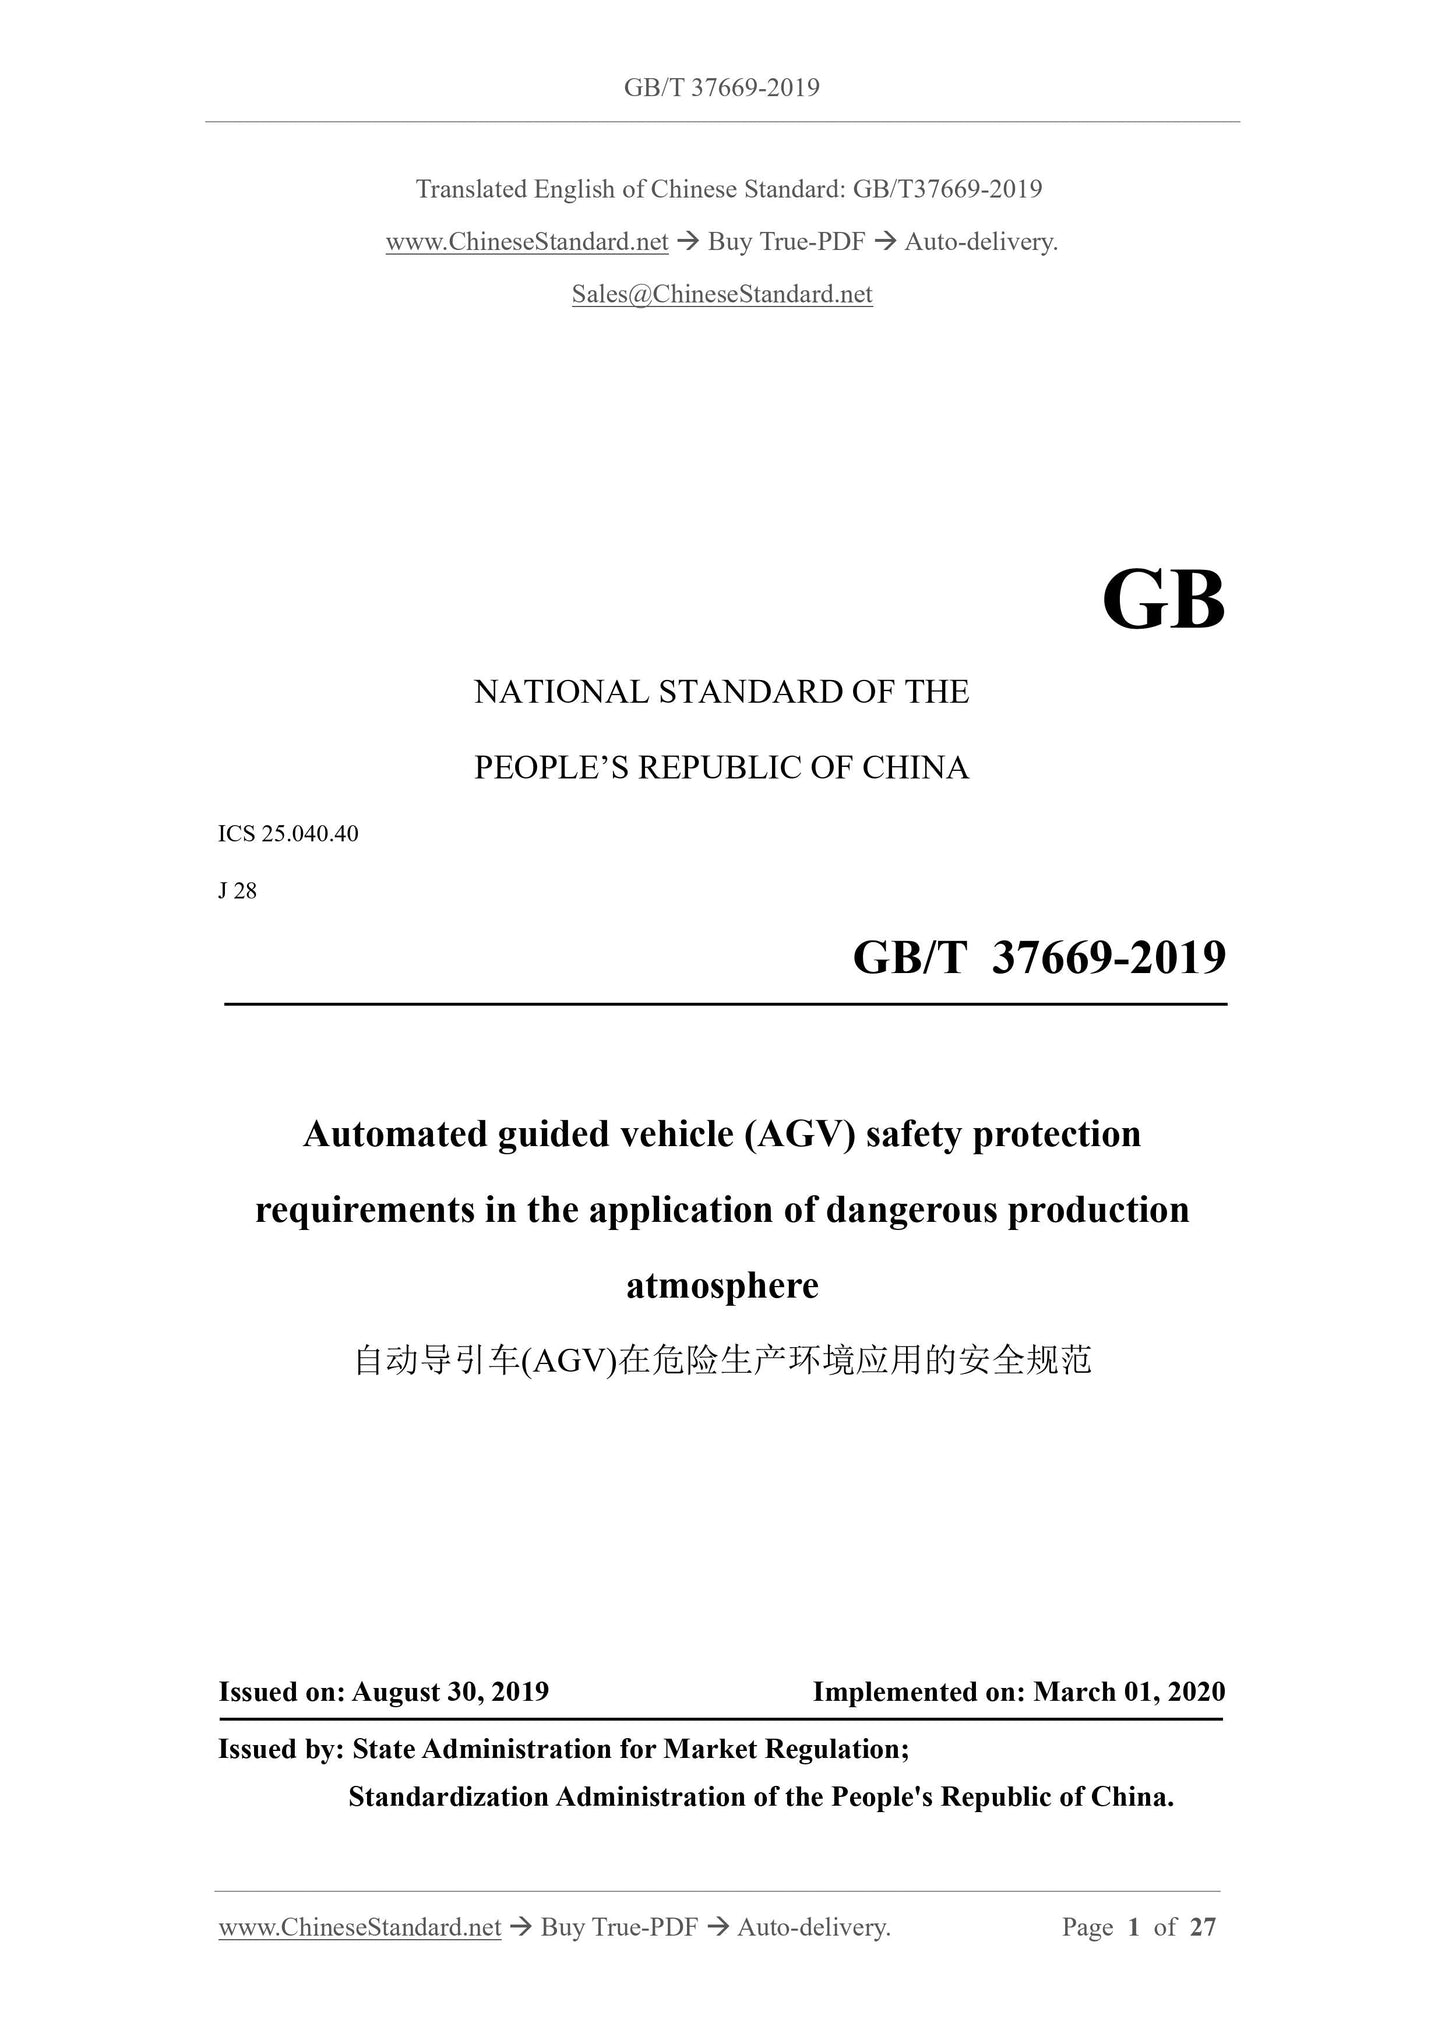 GB/T 37669-2019 Page 1